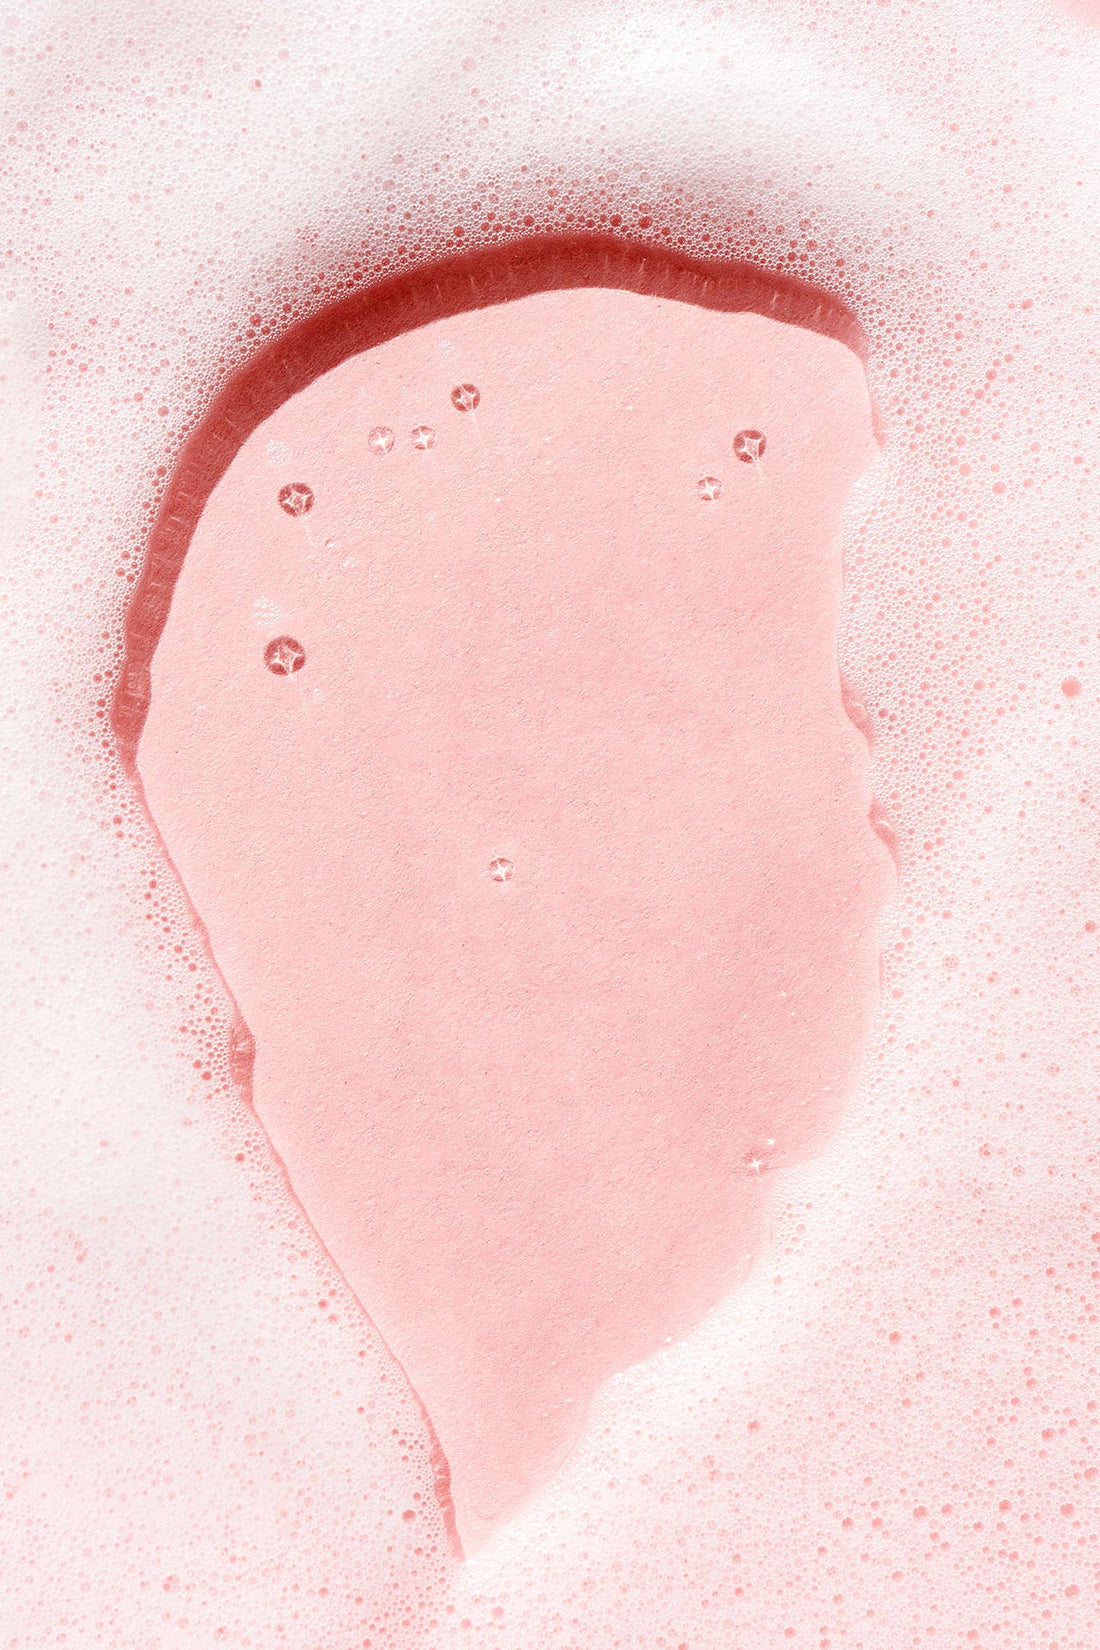 Sudsy white foam on a light pink background